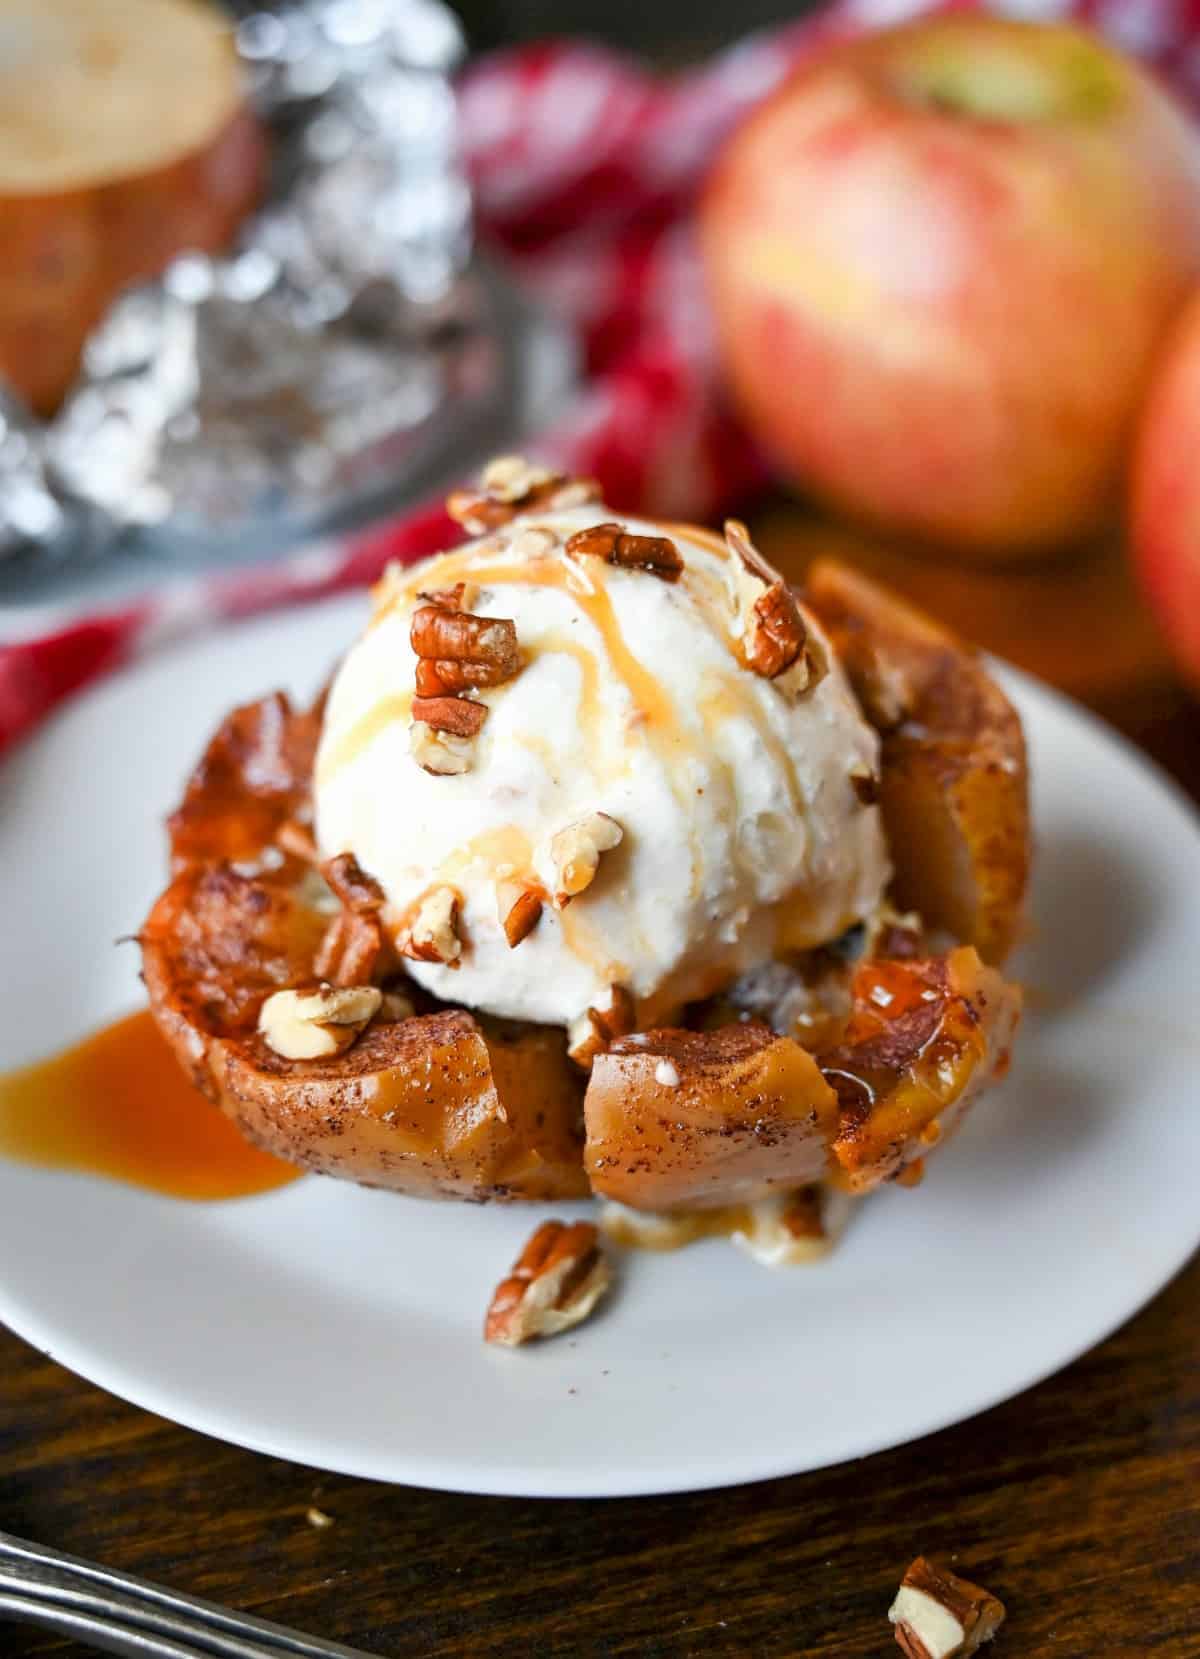 Bloomin grilled apple on a small white plate with caramel sauce and pecans on top. Two apples in the background.